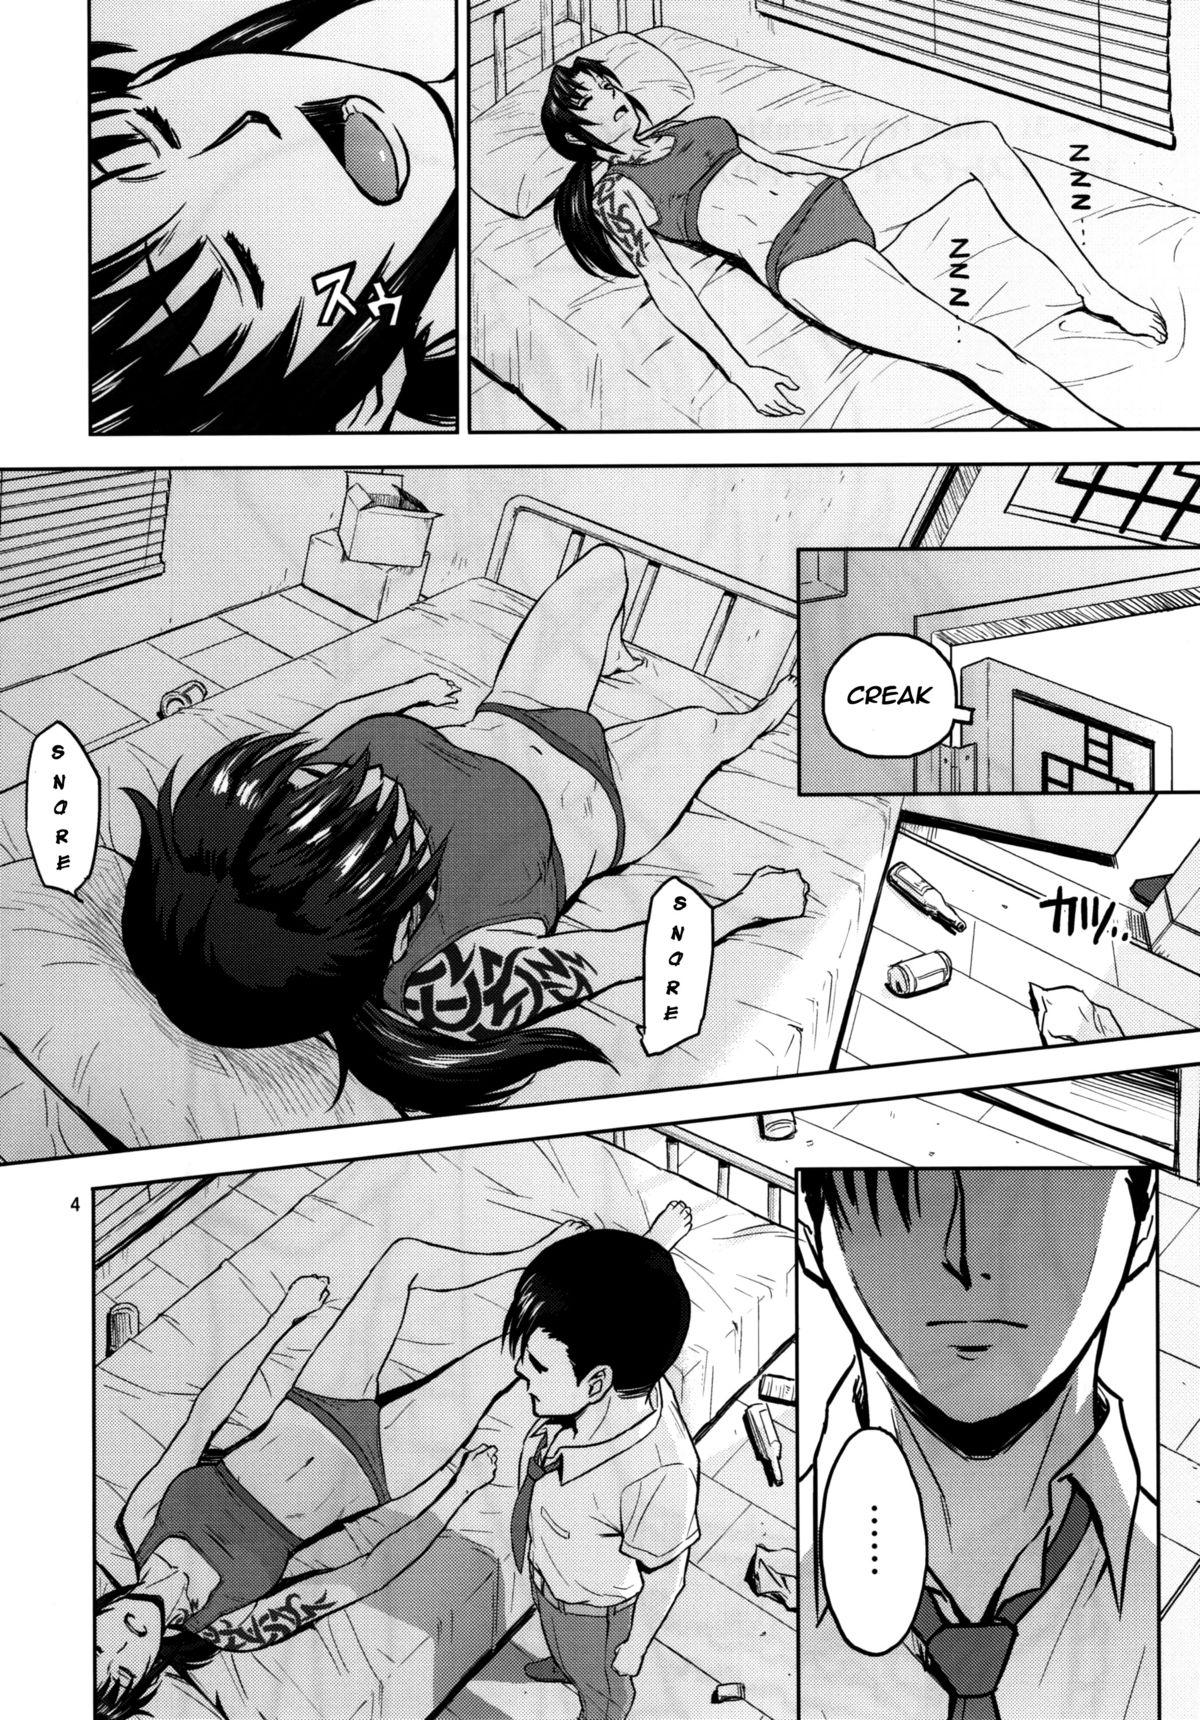 Sesso Sick from drinking - Black lagoon Rub - Page 4